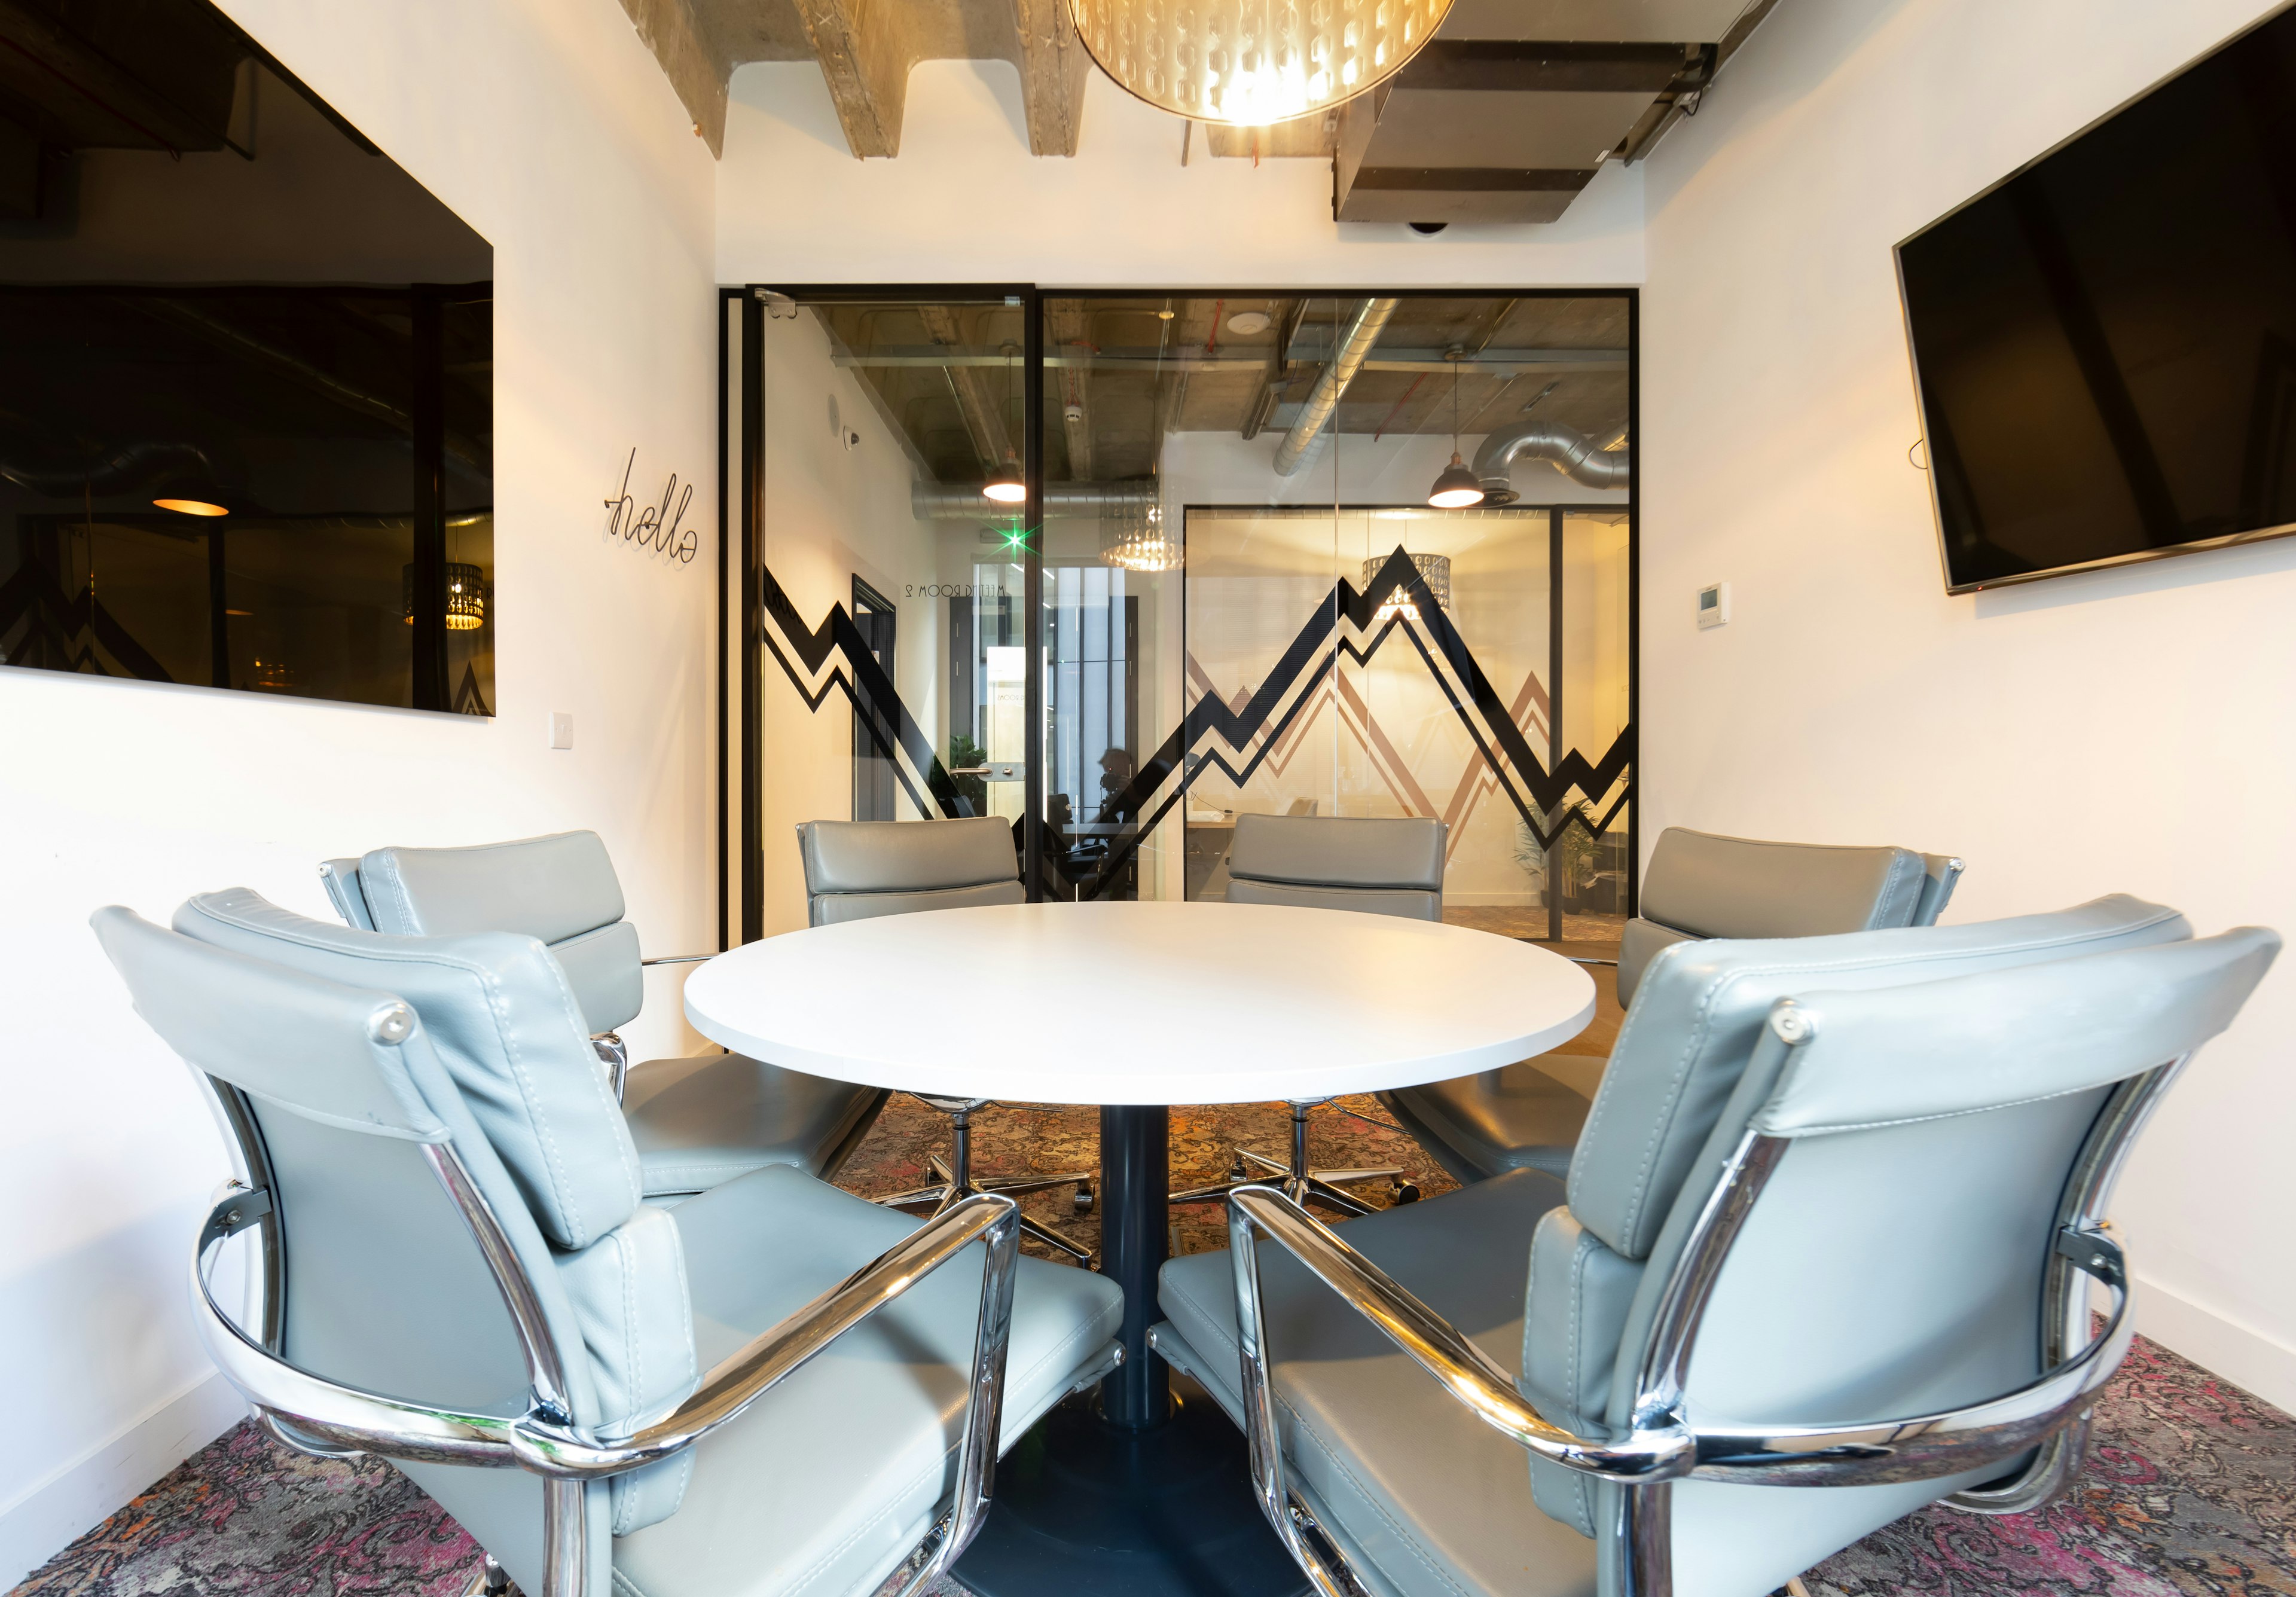 Business - The Space Aldgate